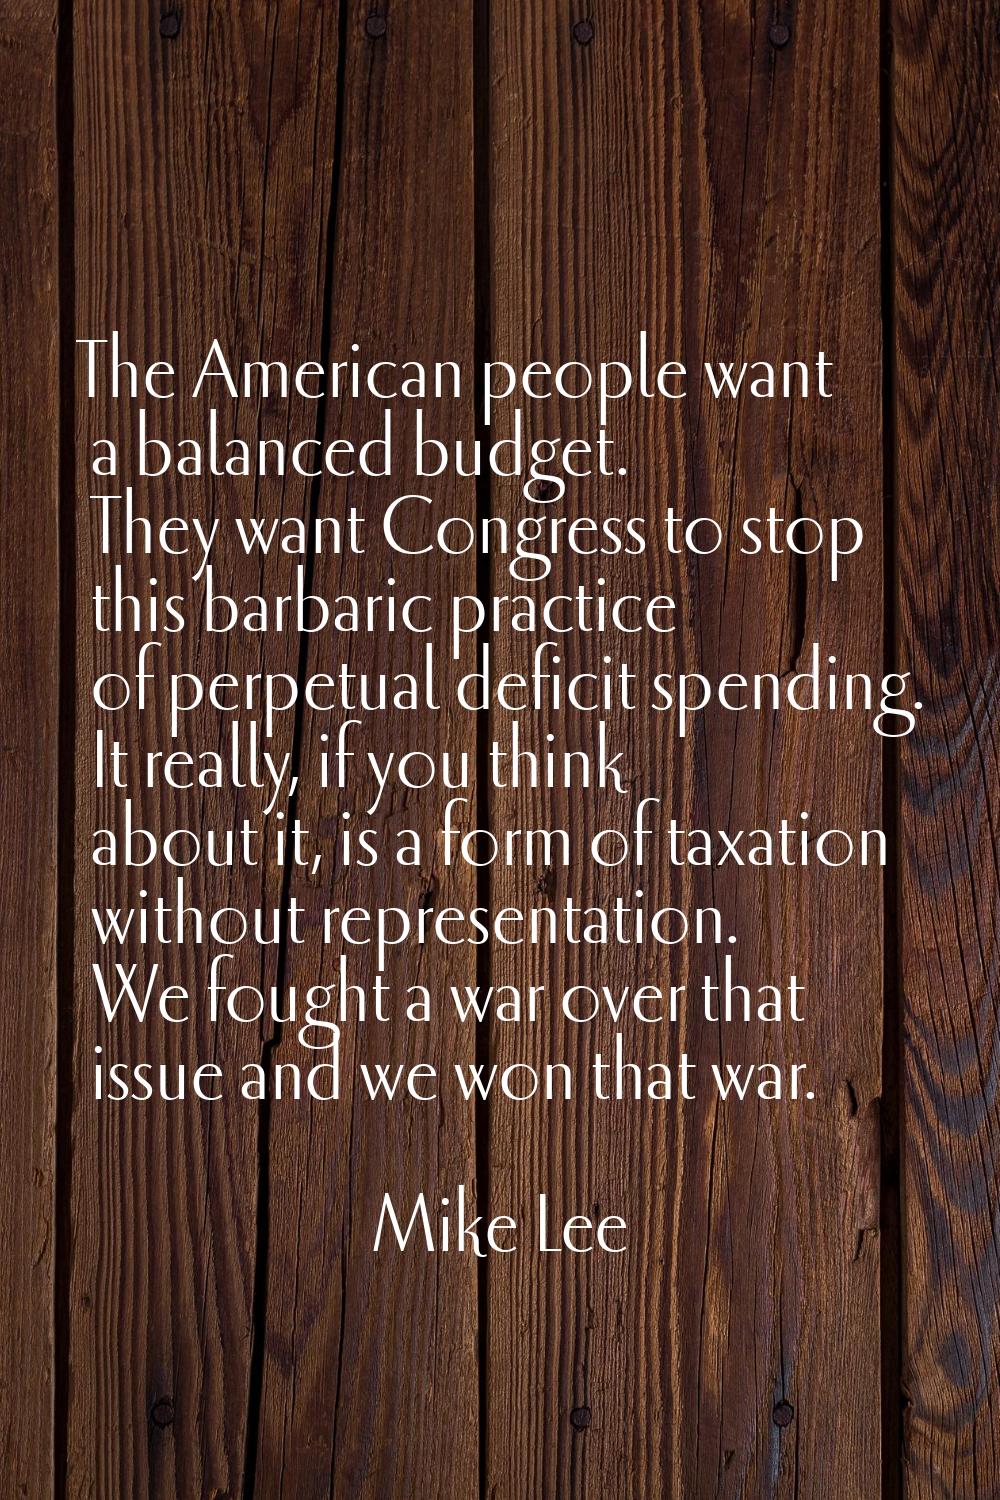 The American people want a balanced budget. They want Congress to stop this barbaric practice of pe